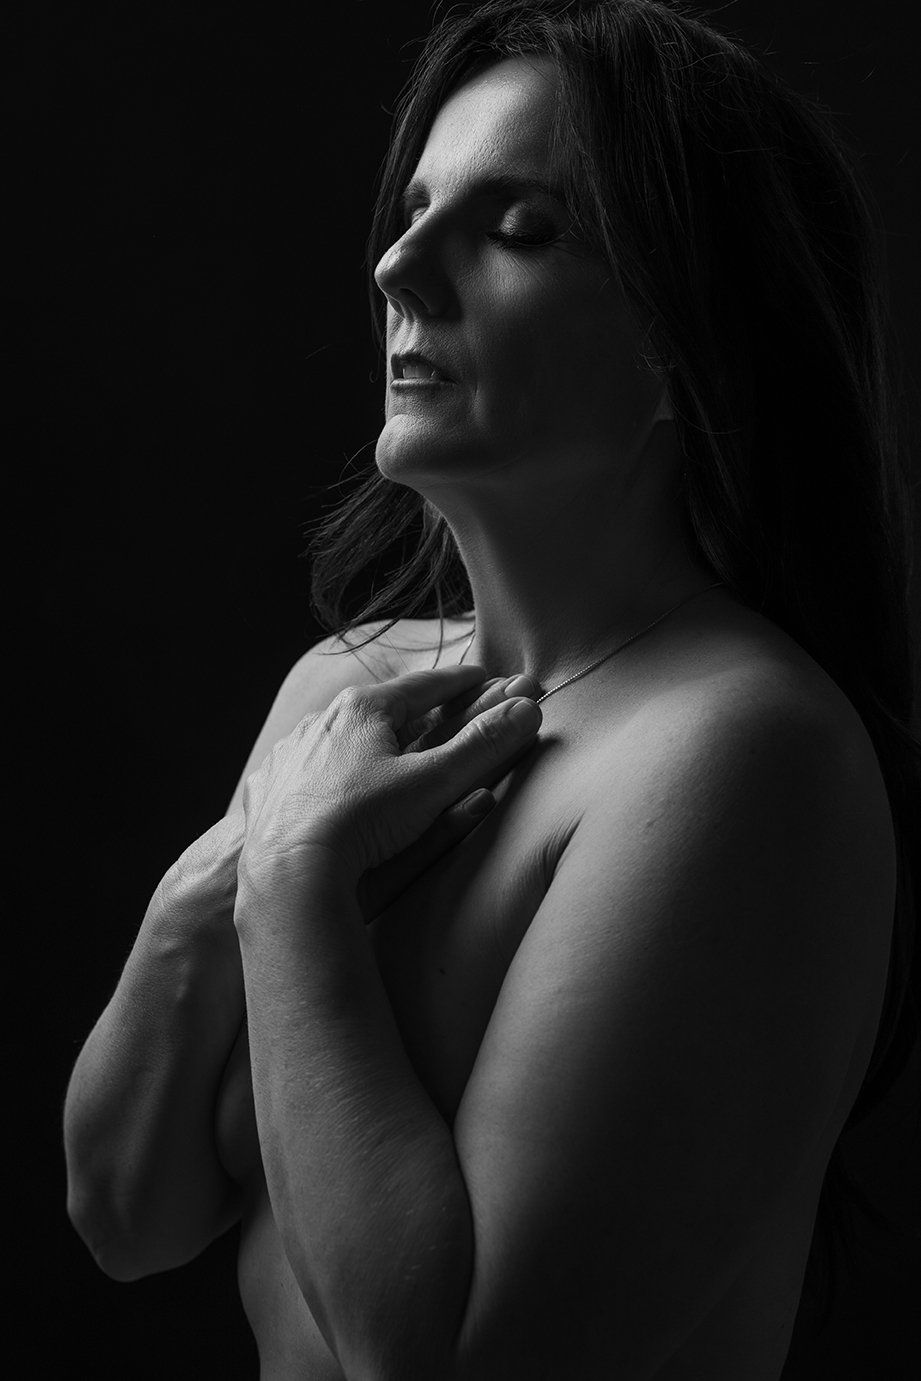 nude portrait of a woman with eyes closed, hands on collar bones